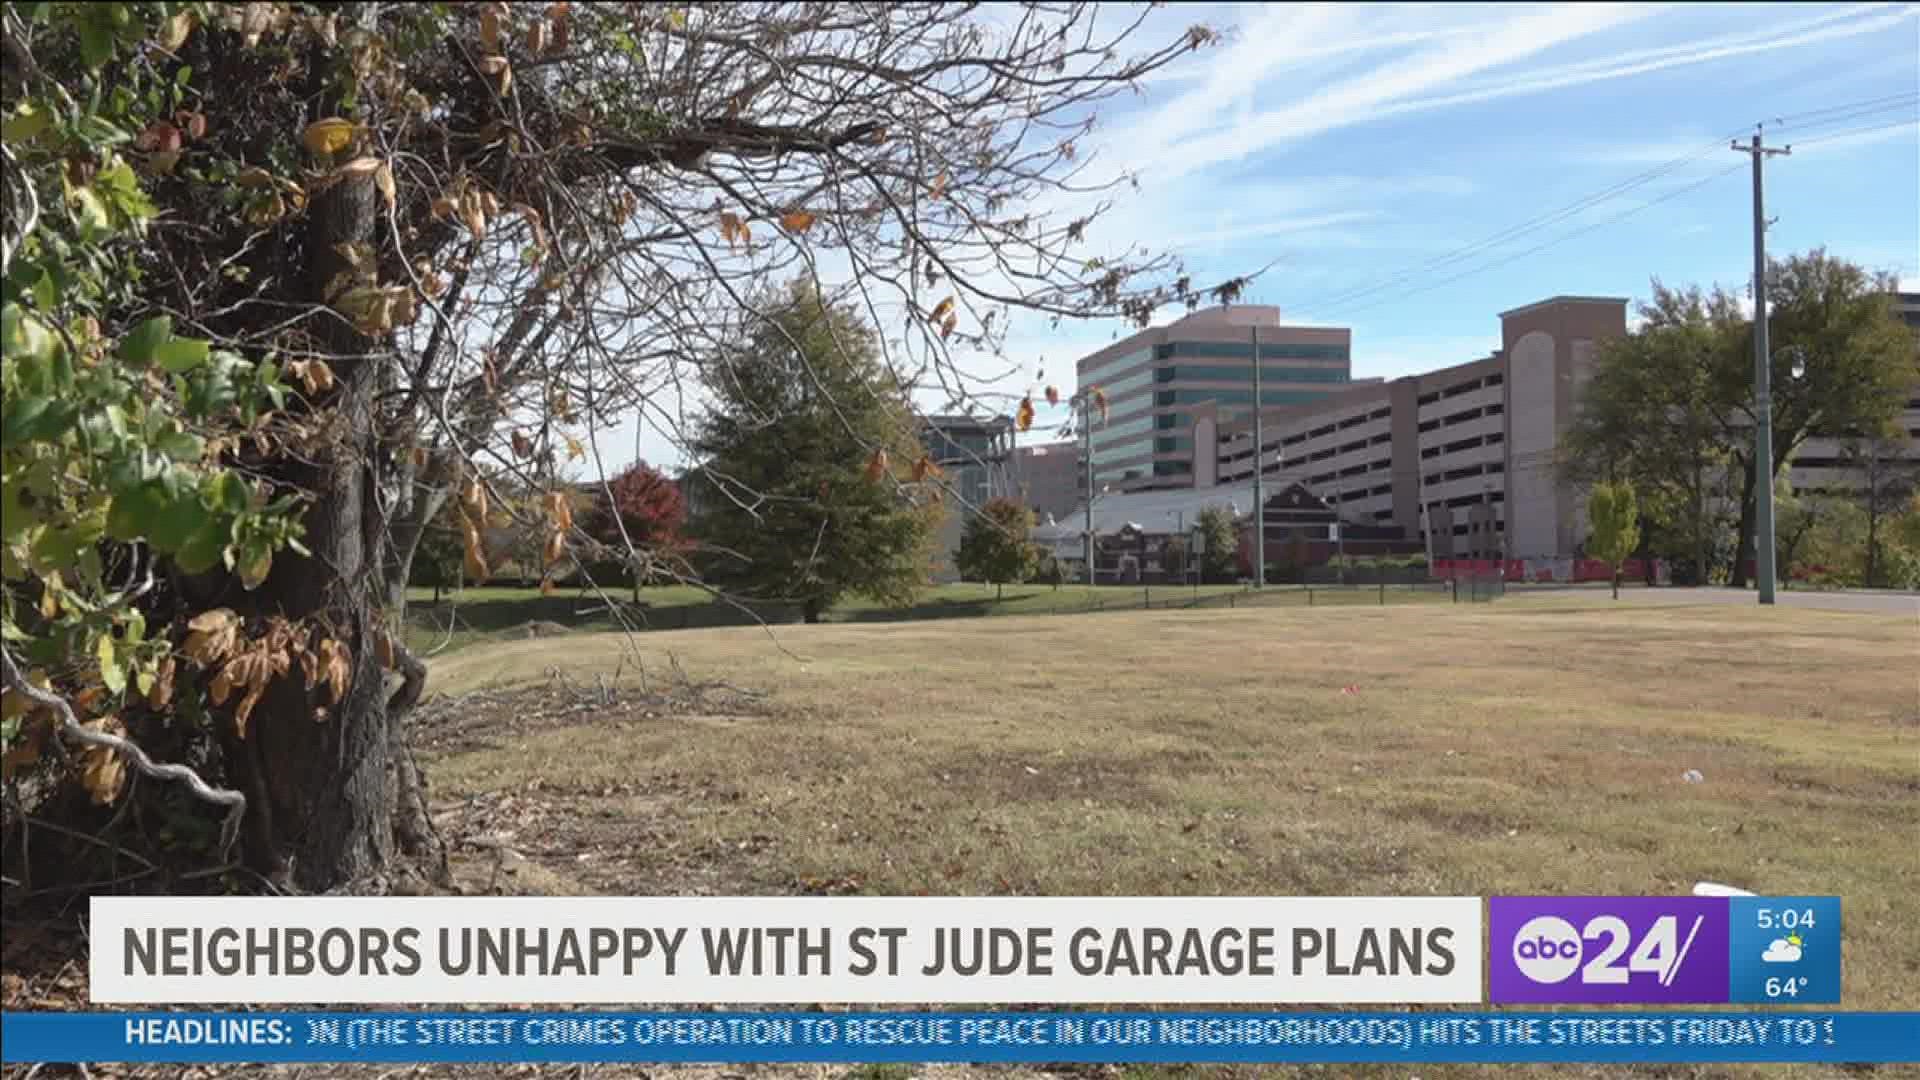 St. Jude Children's Research Hospital is facing some opposition to its plan to build a seven-story parking garage as part of the $11 billion expansion.